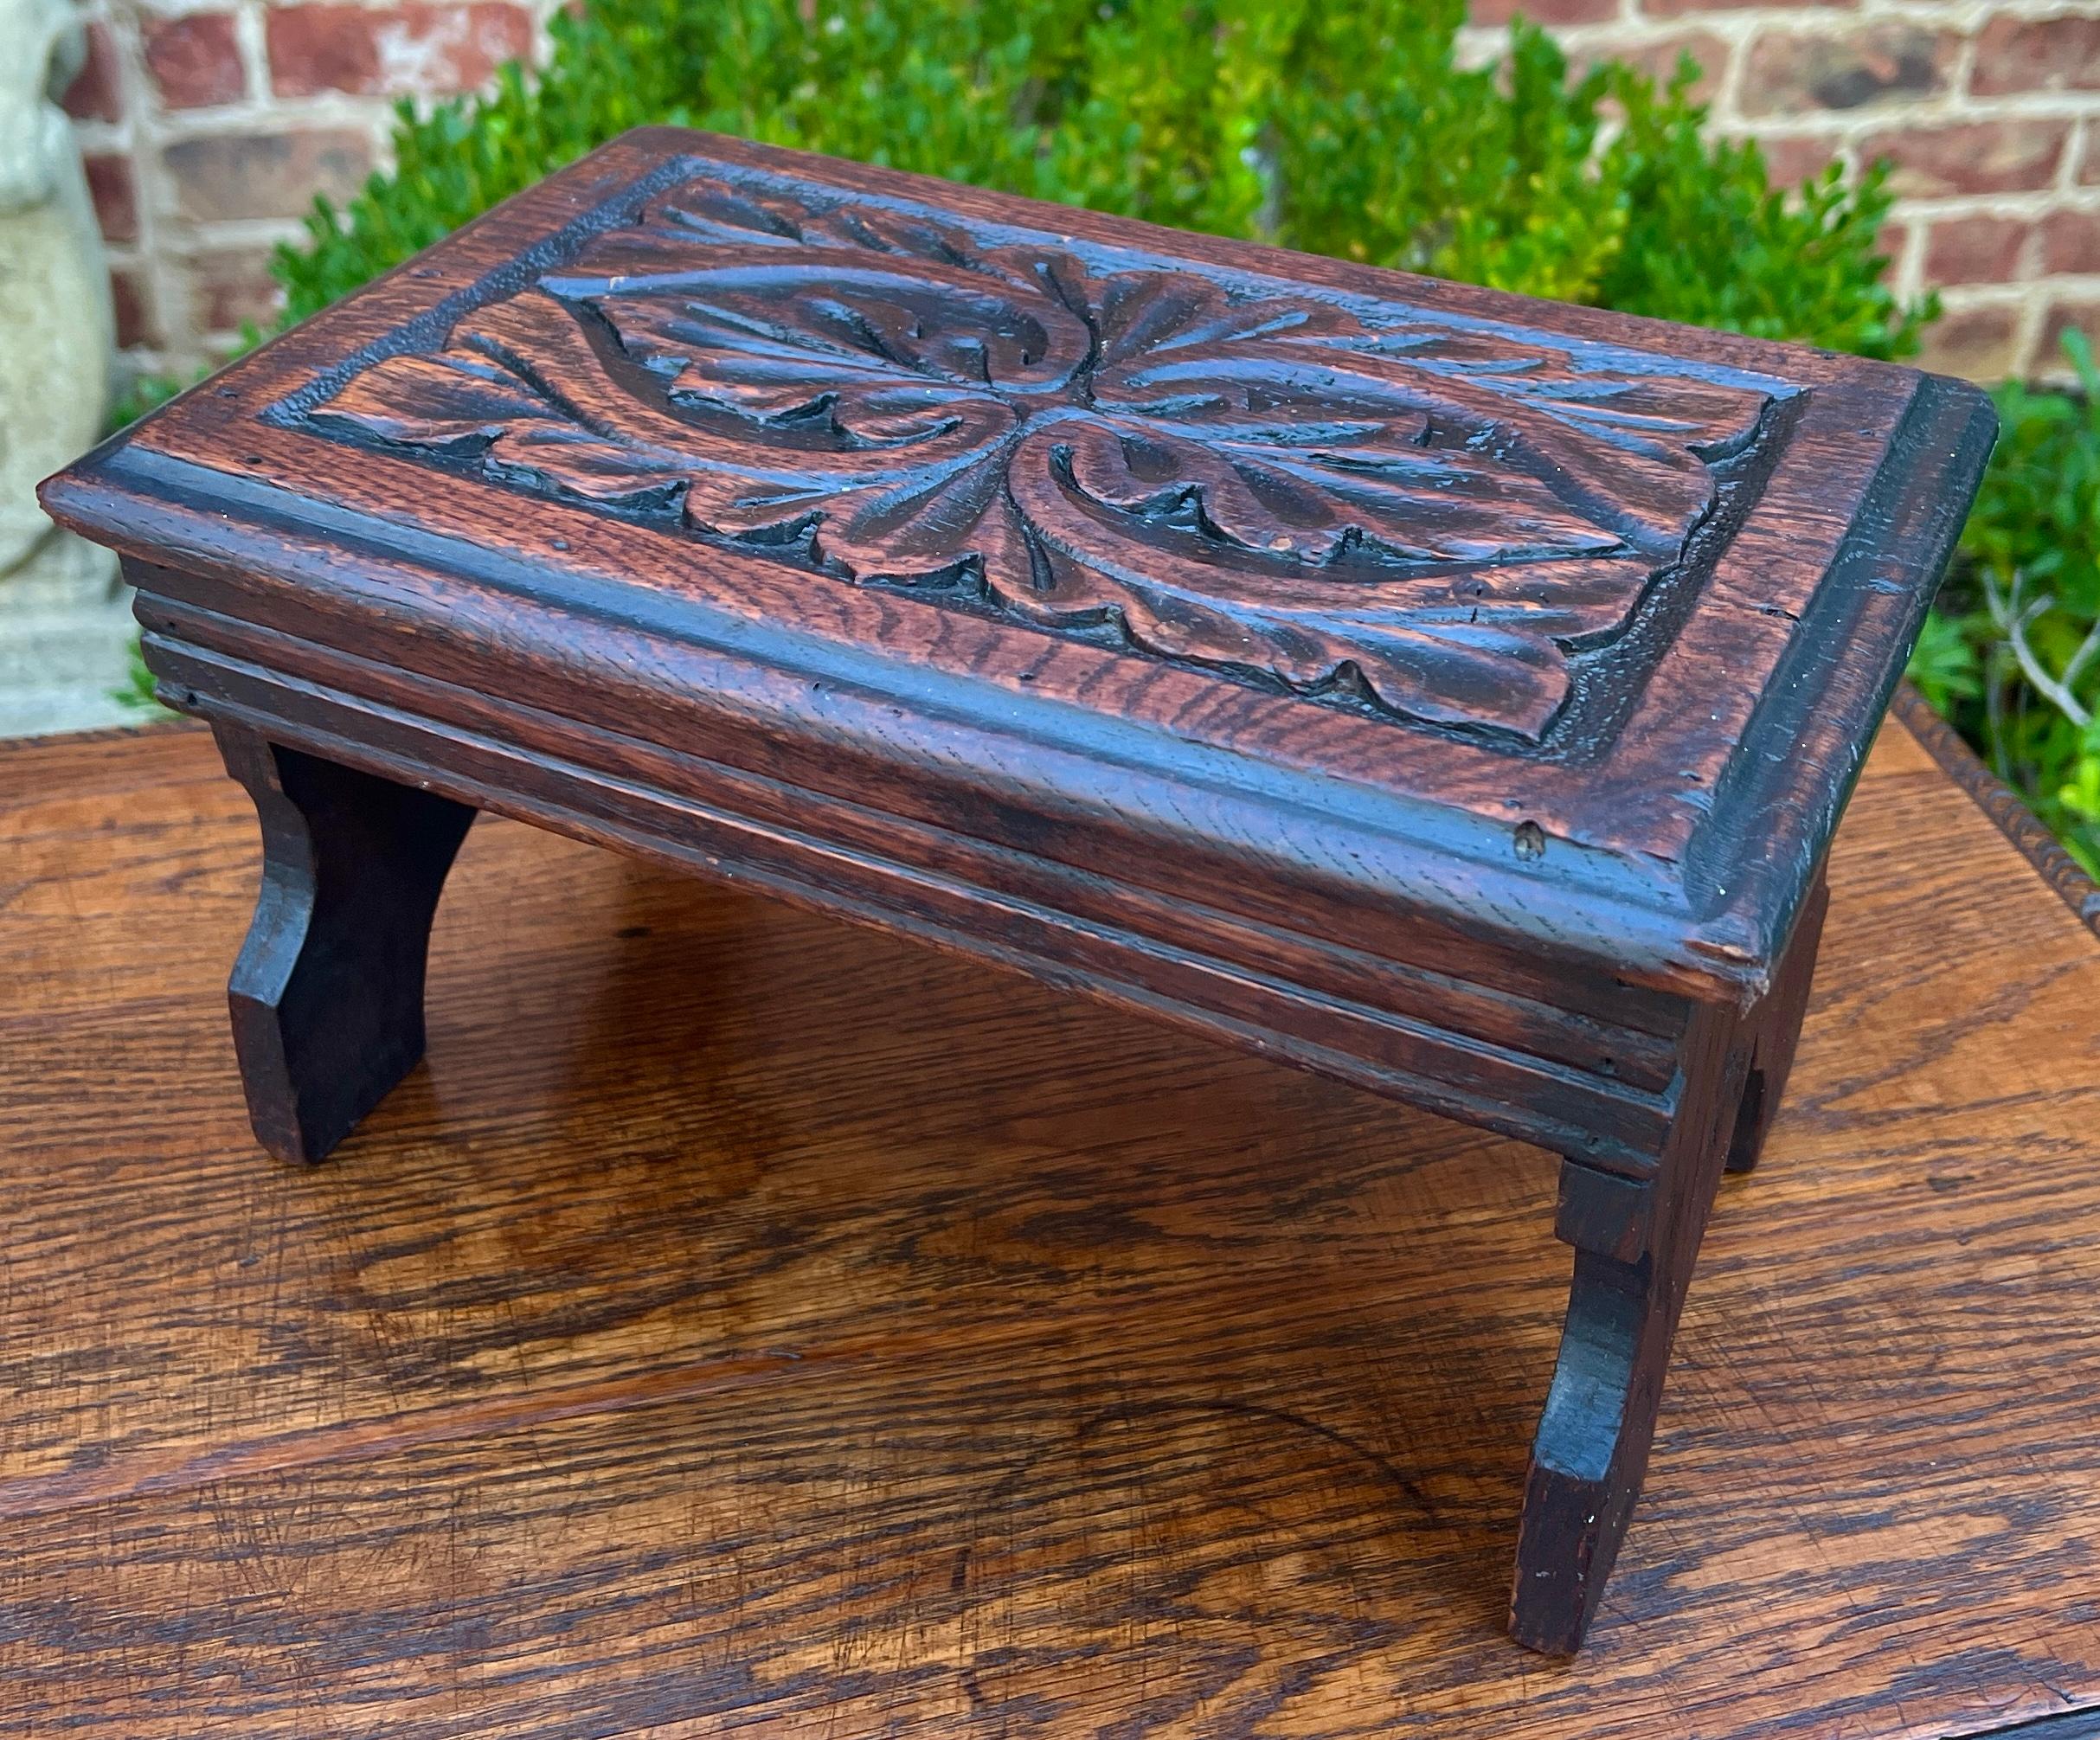 Antique English Kettle Stand Small Footstool Bench Carved Oak c. 1920s-30s For Sale 6